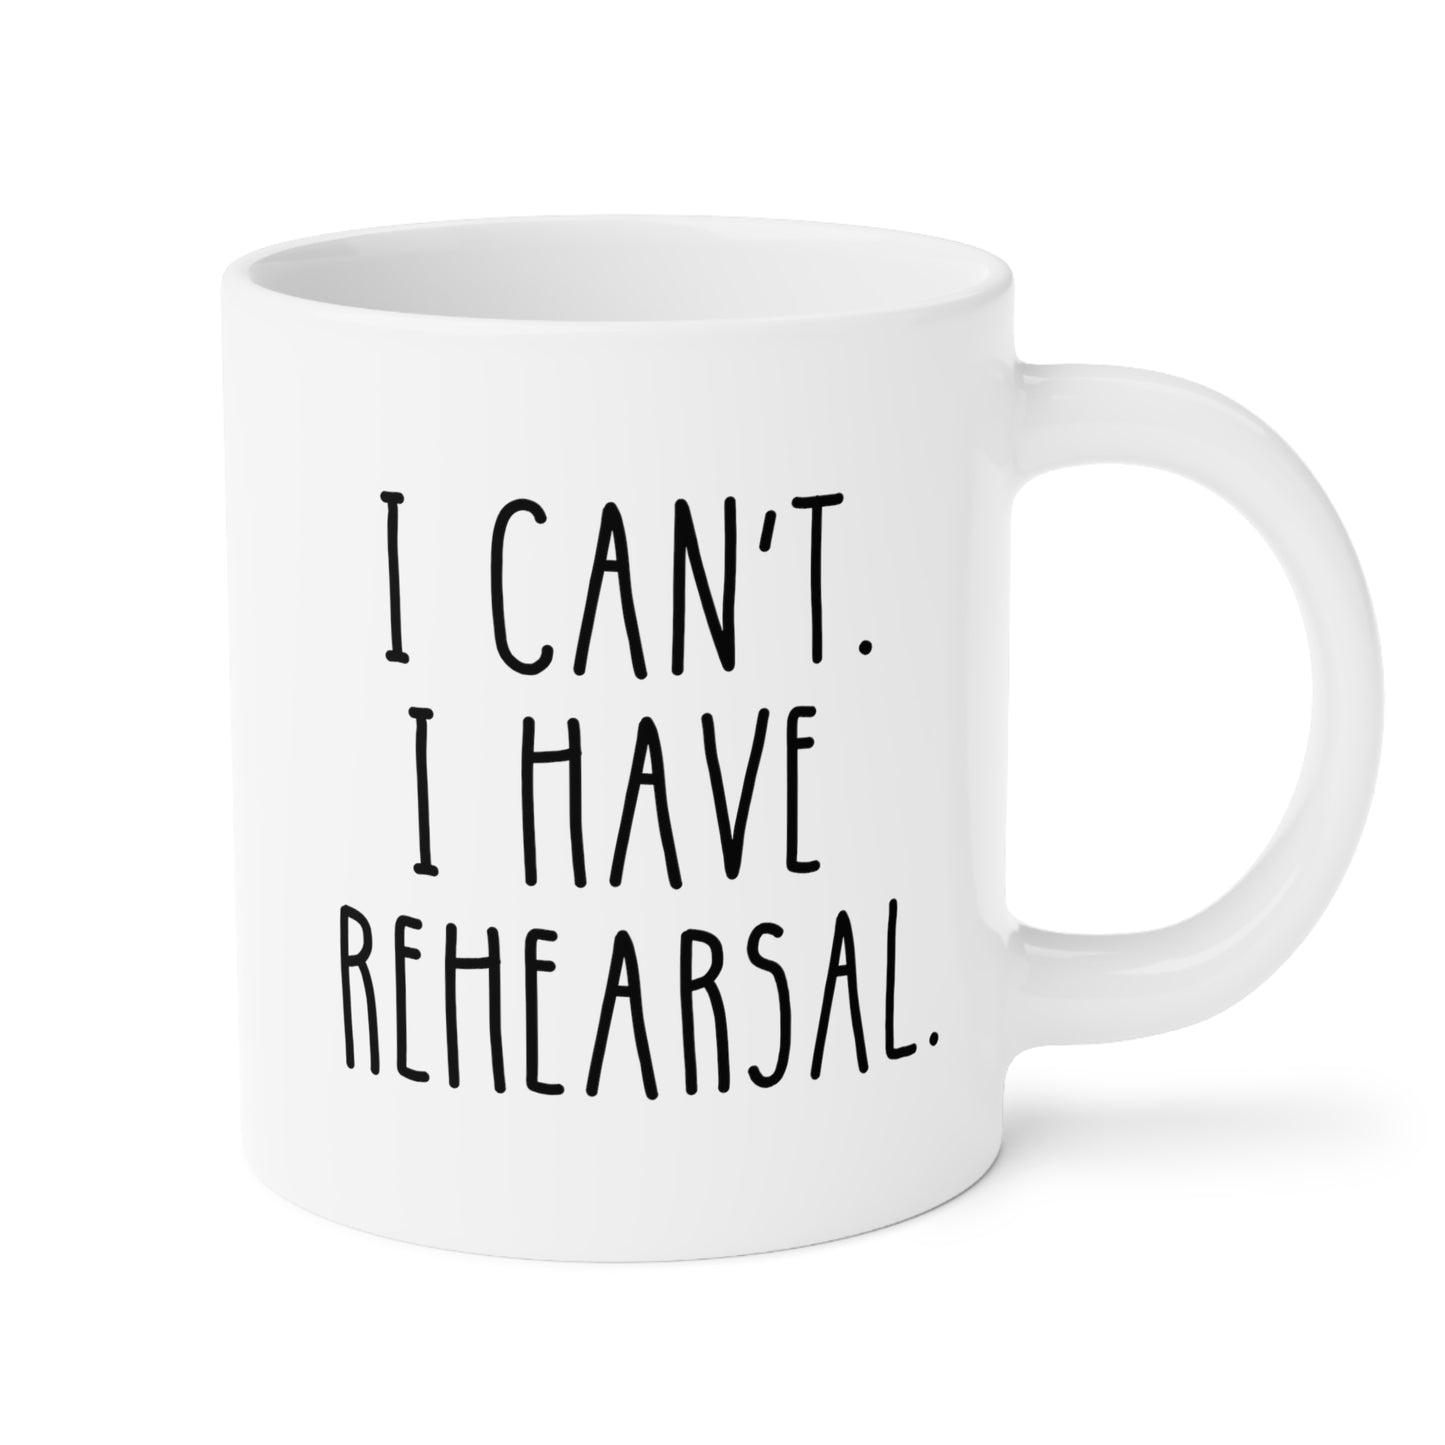 I Can't. I Have Rehearsal. 20oz white funny large coffee mug gift for theater actor actress dancer band singer waveywares wavey wares wavywares wavy wares